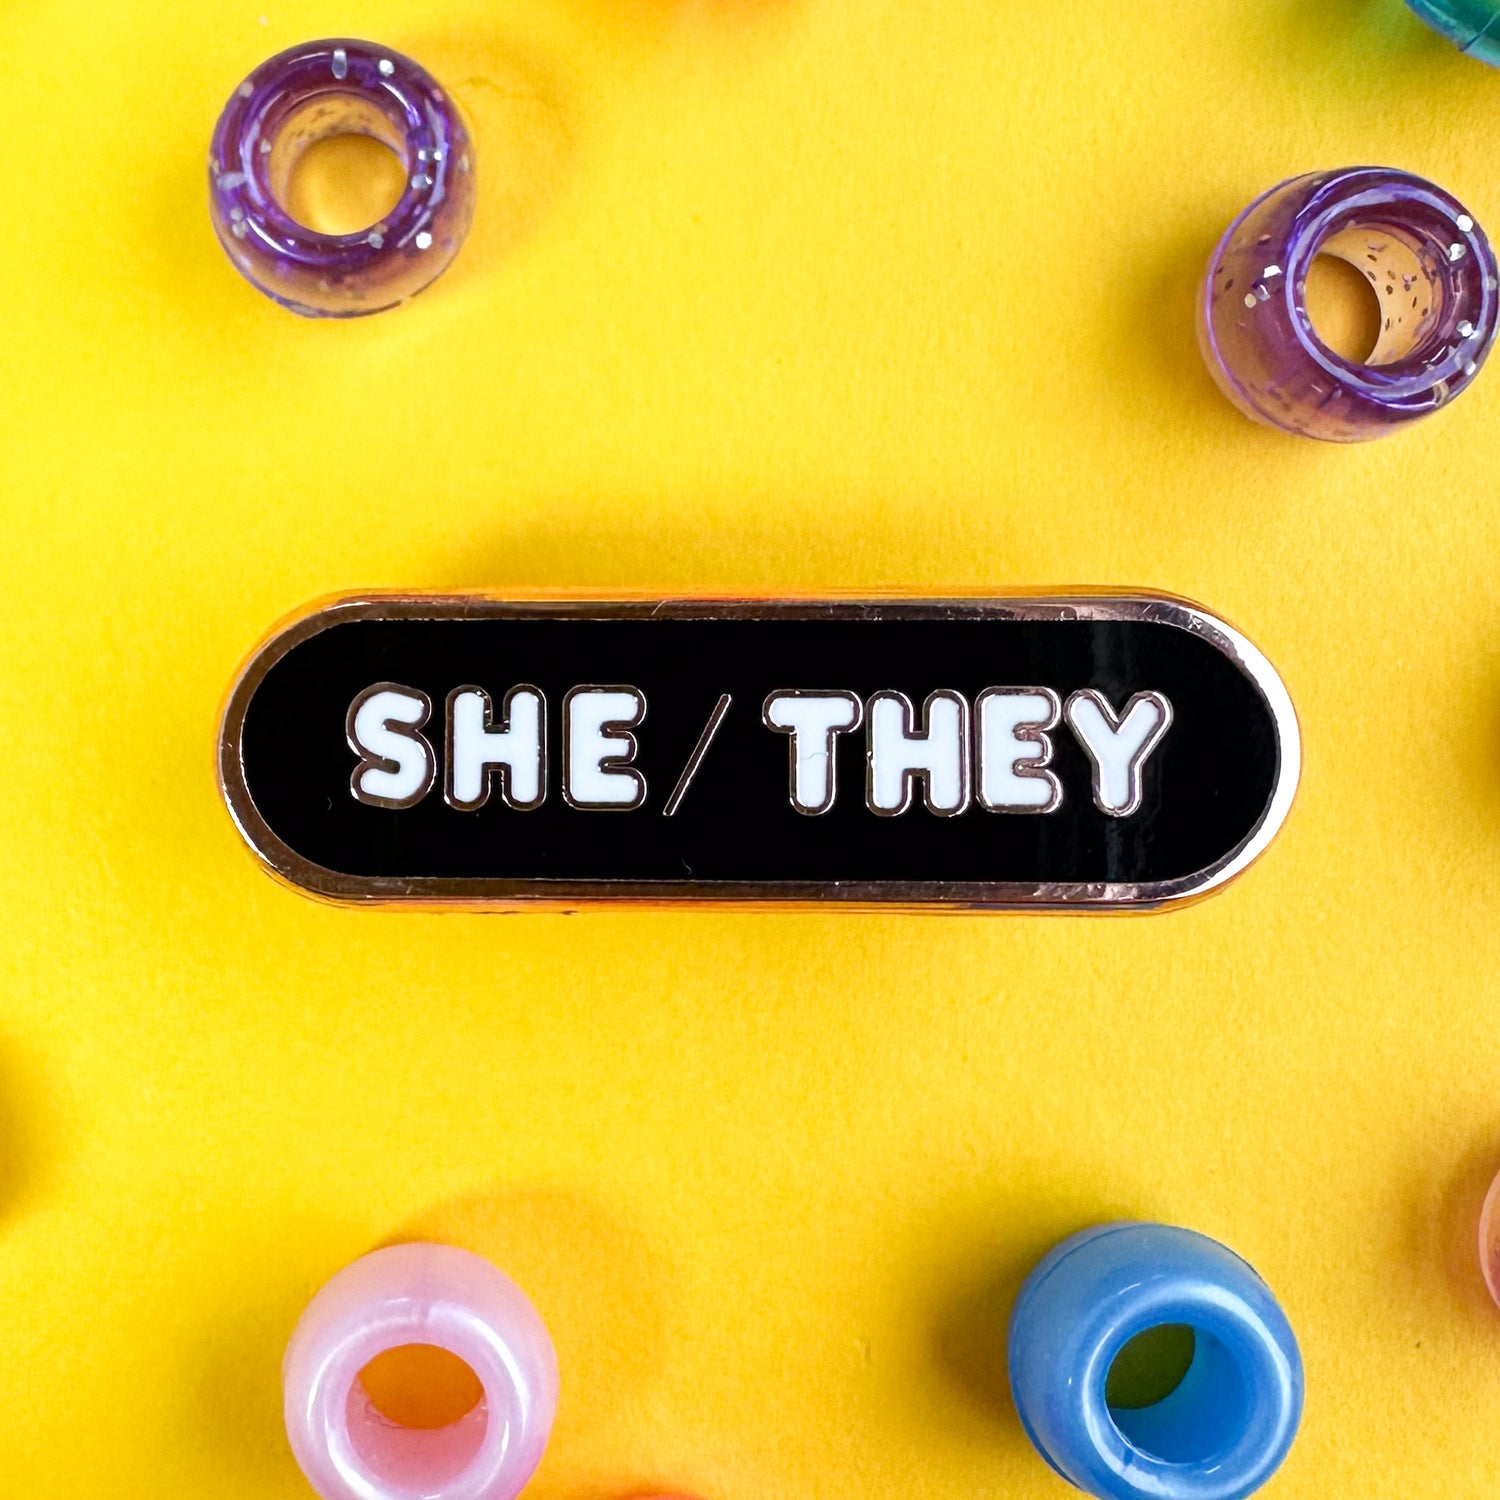 An oval shaped pin with the pronouns "She/They" on it. The pin is on a yellow background with purple, blue and pink pony beads around it. 